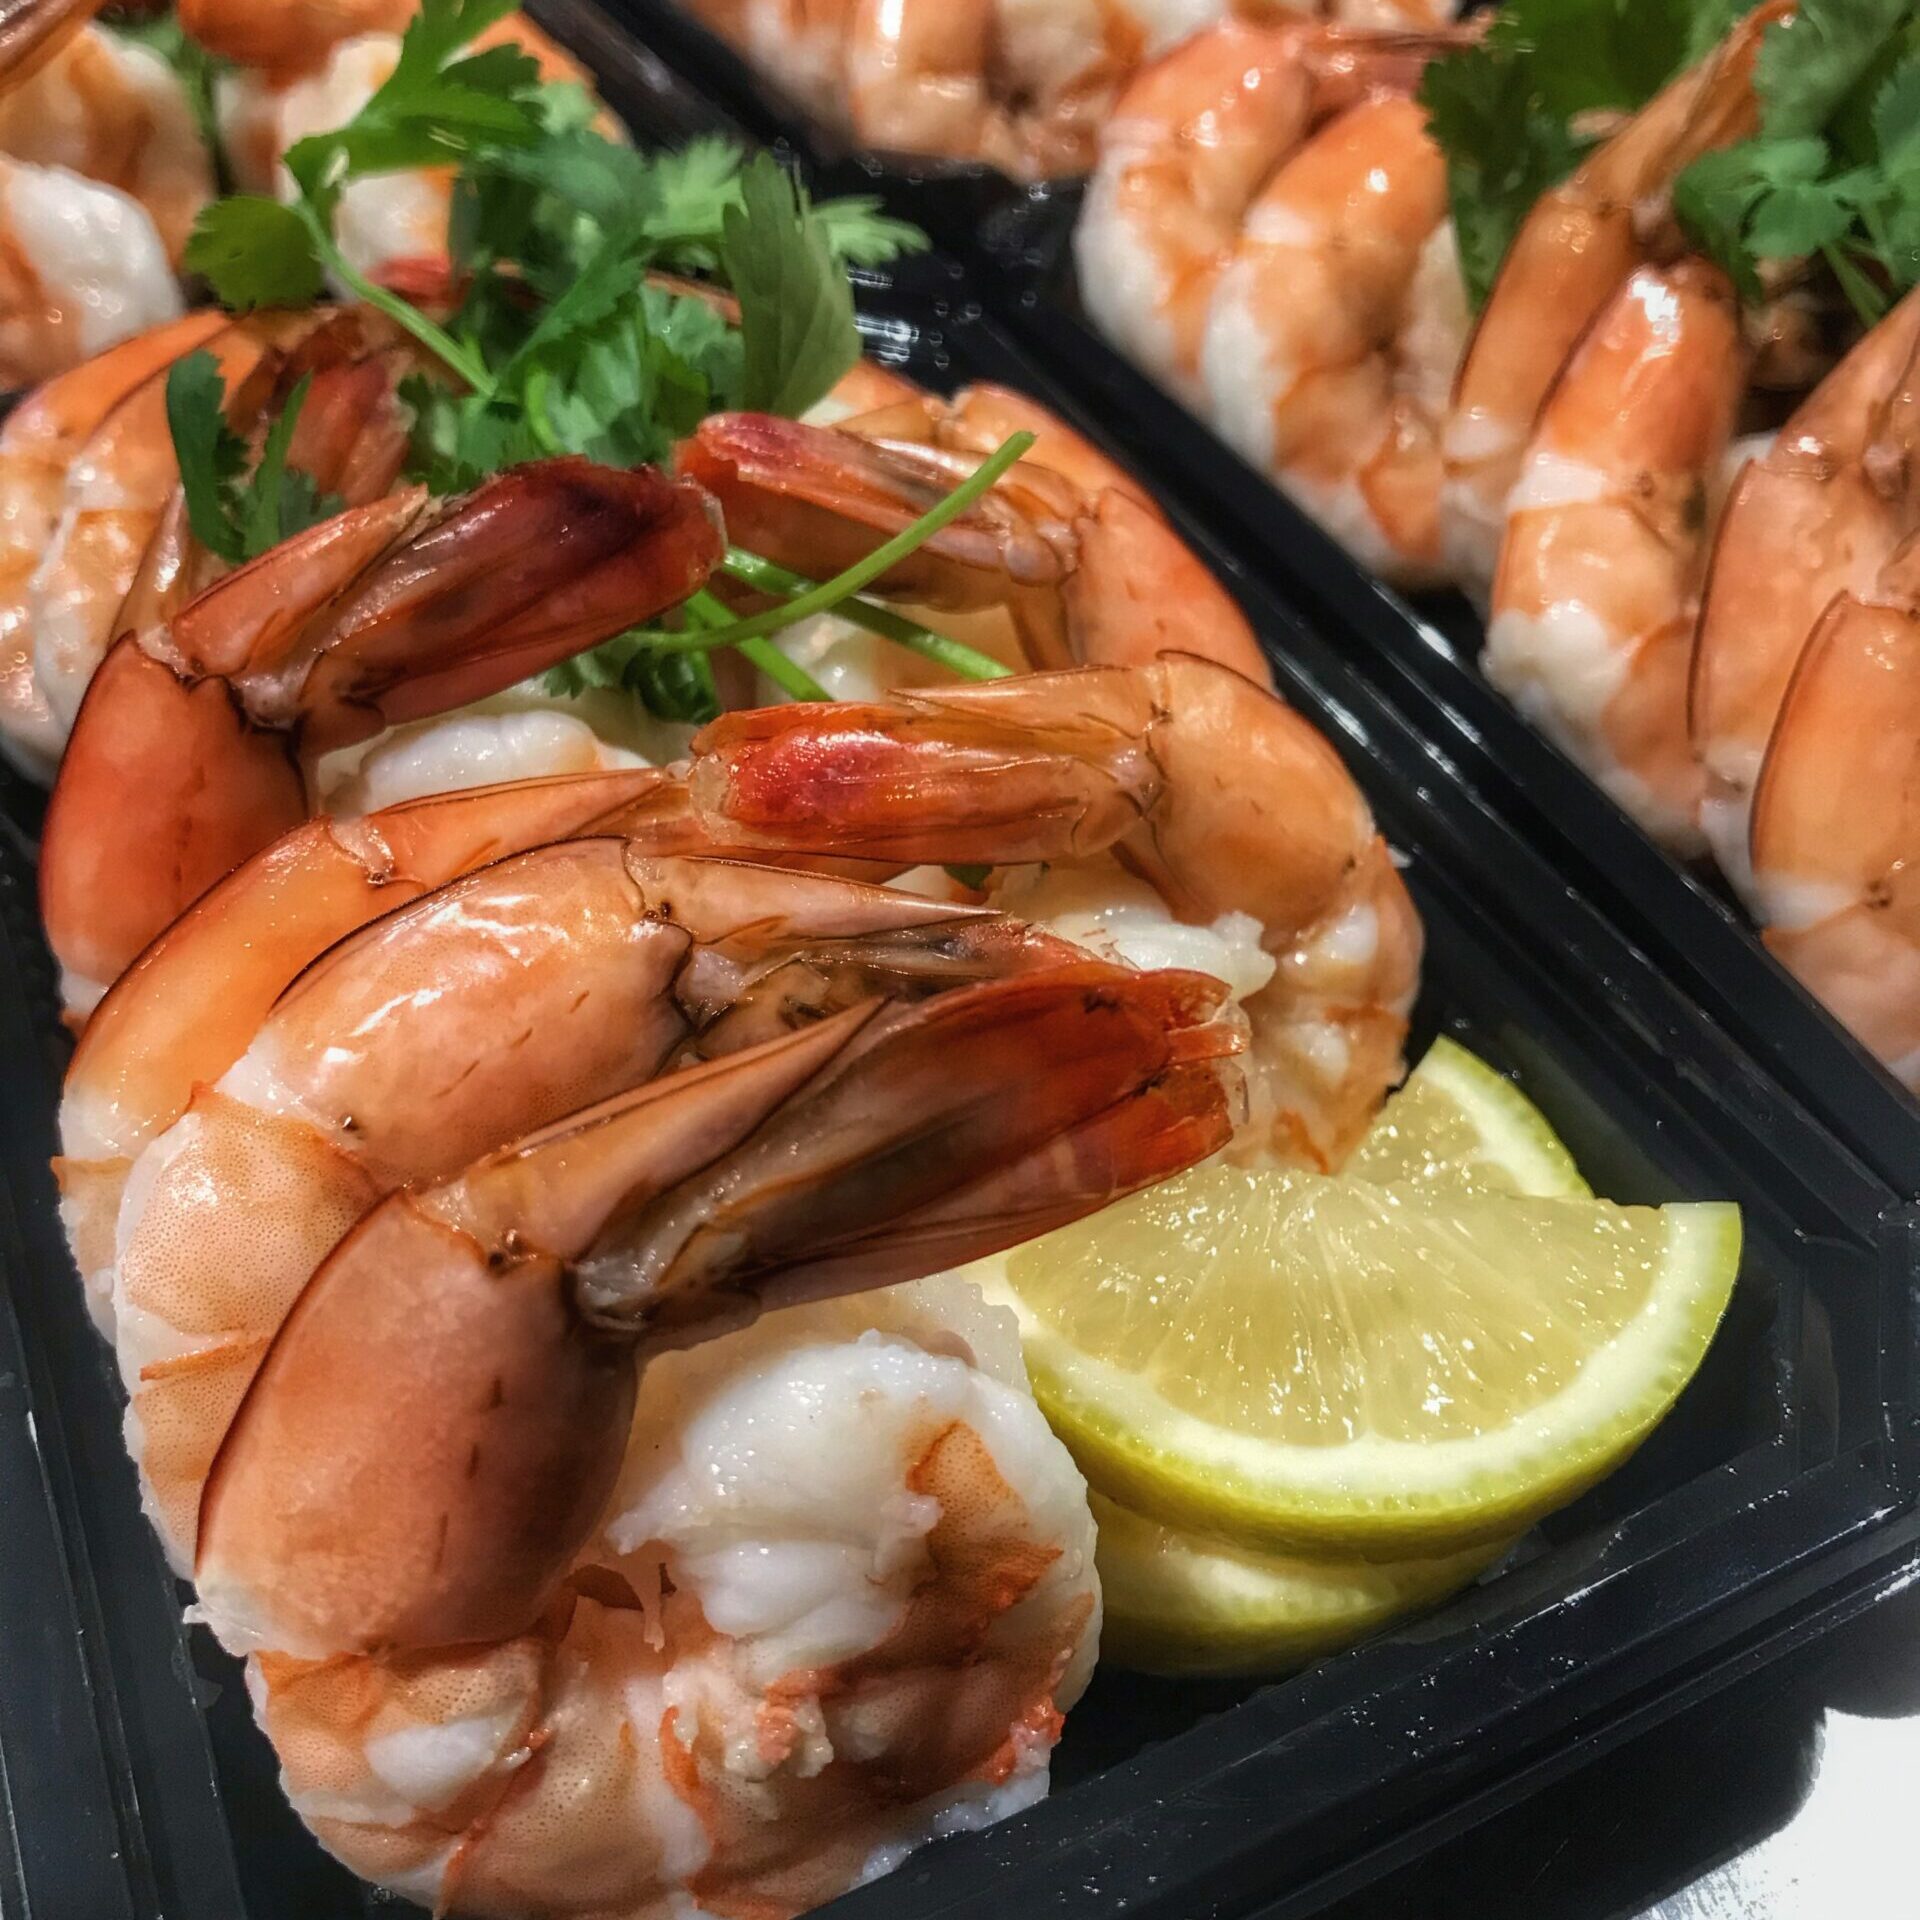 Prawns in black plastic containers with lemon wedges.